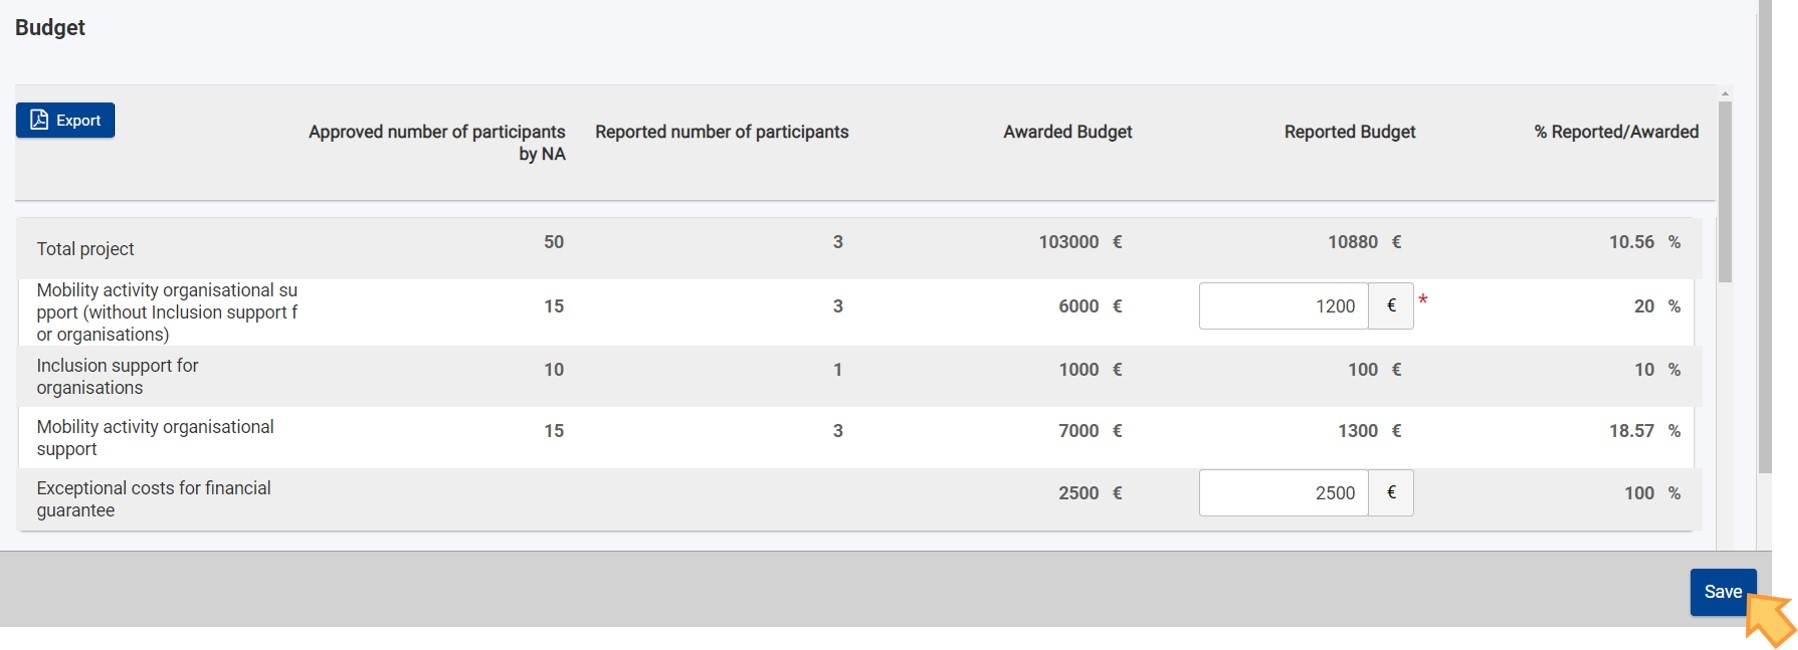 Click on the Save button to save any changes made on the budget screen, if applicable